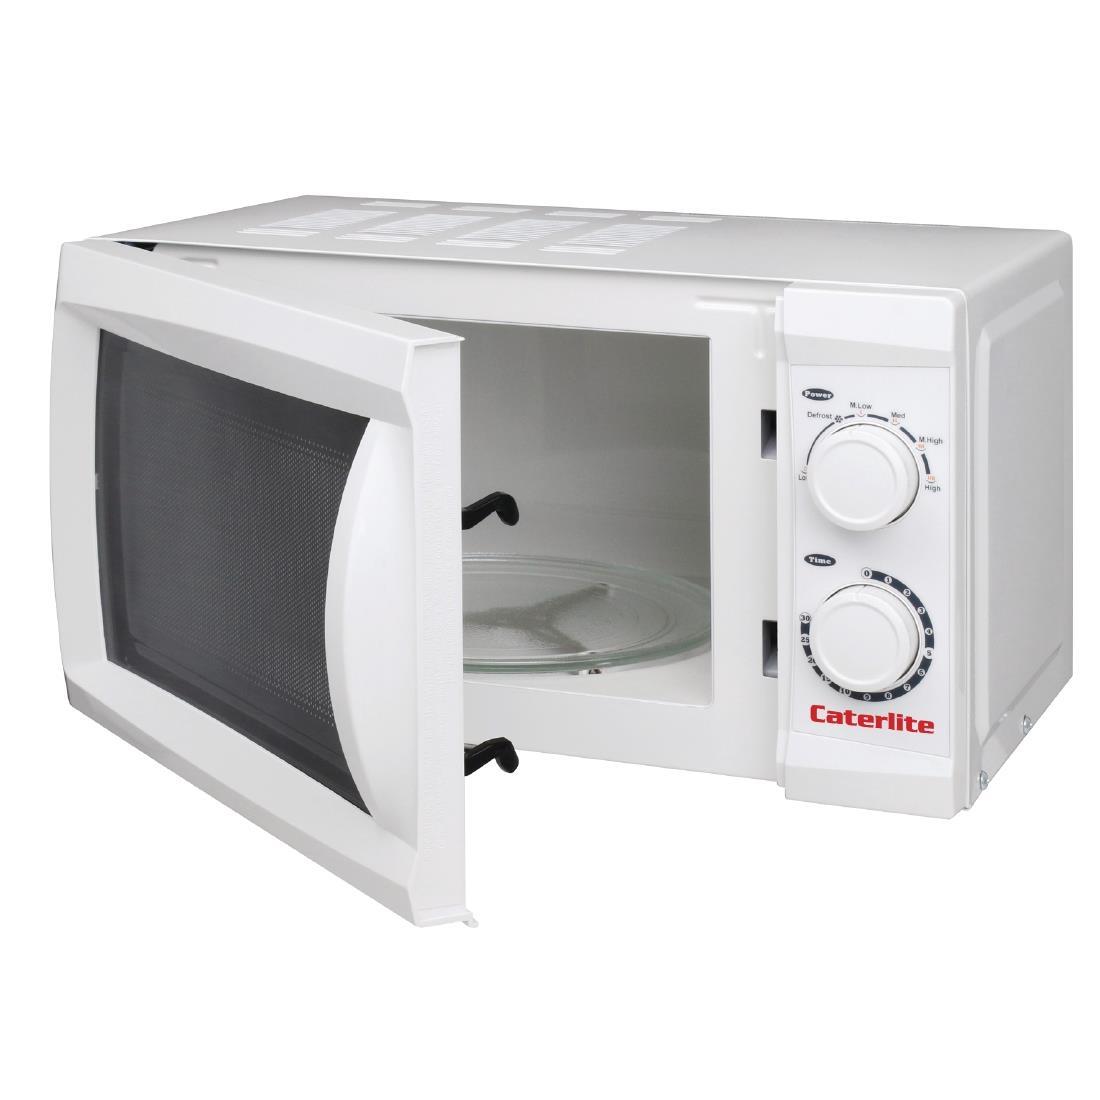 Caterlite Compact Microwave 17ltr 700W - CN180  - 7